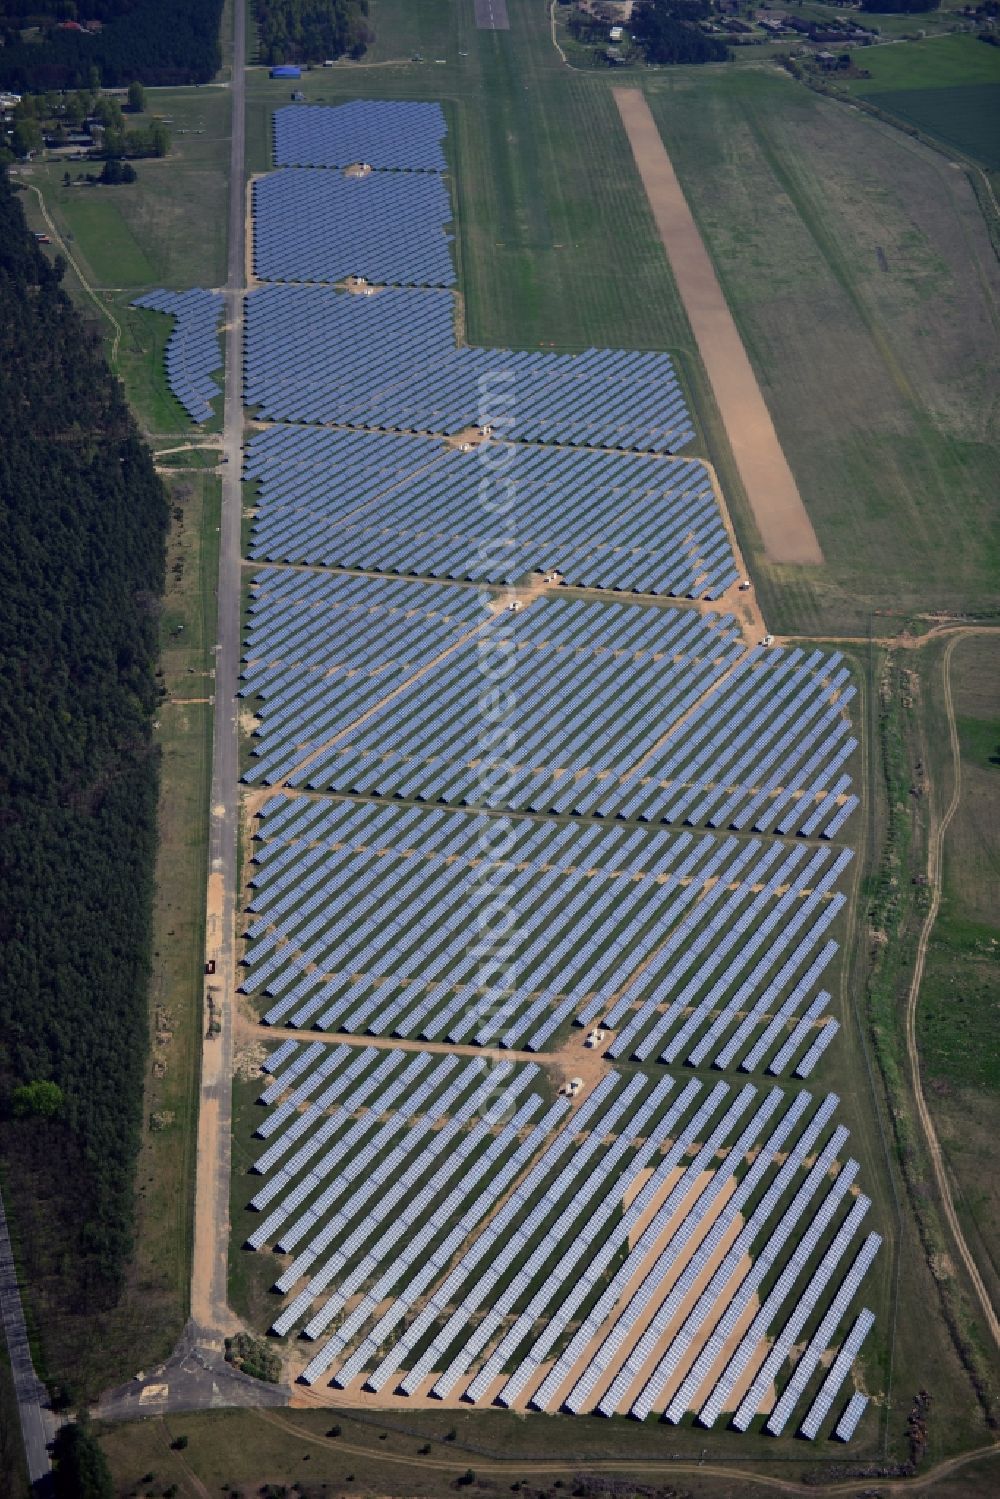 Aerial photograph Eggersdorf bei Müncheberg - View at the of the solar energy park at the airport Eggersdorf in Brandenburg